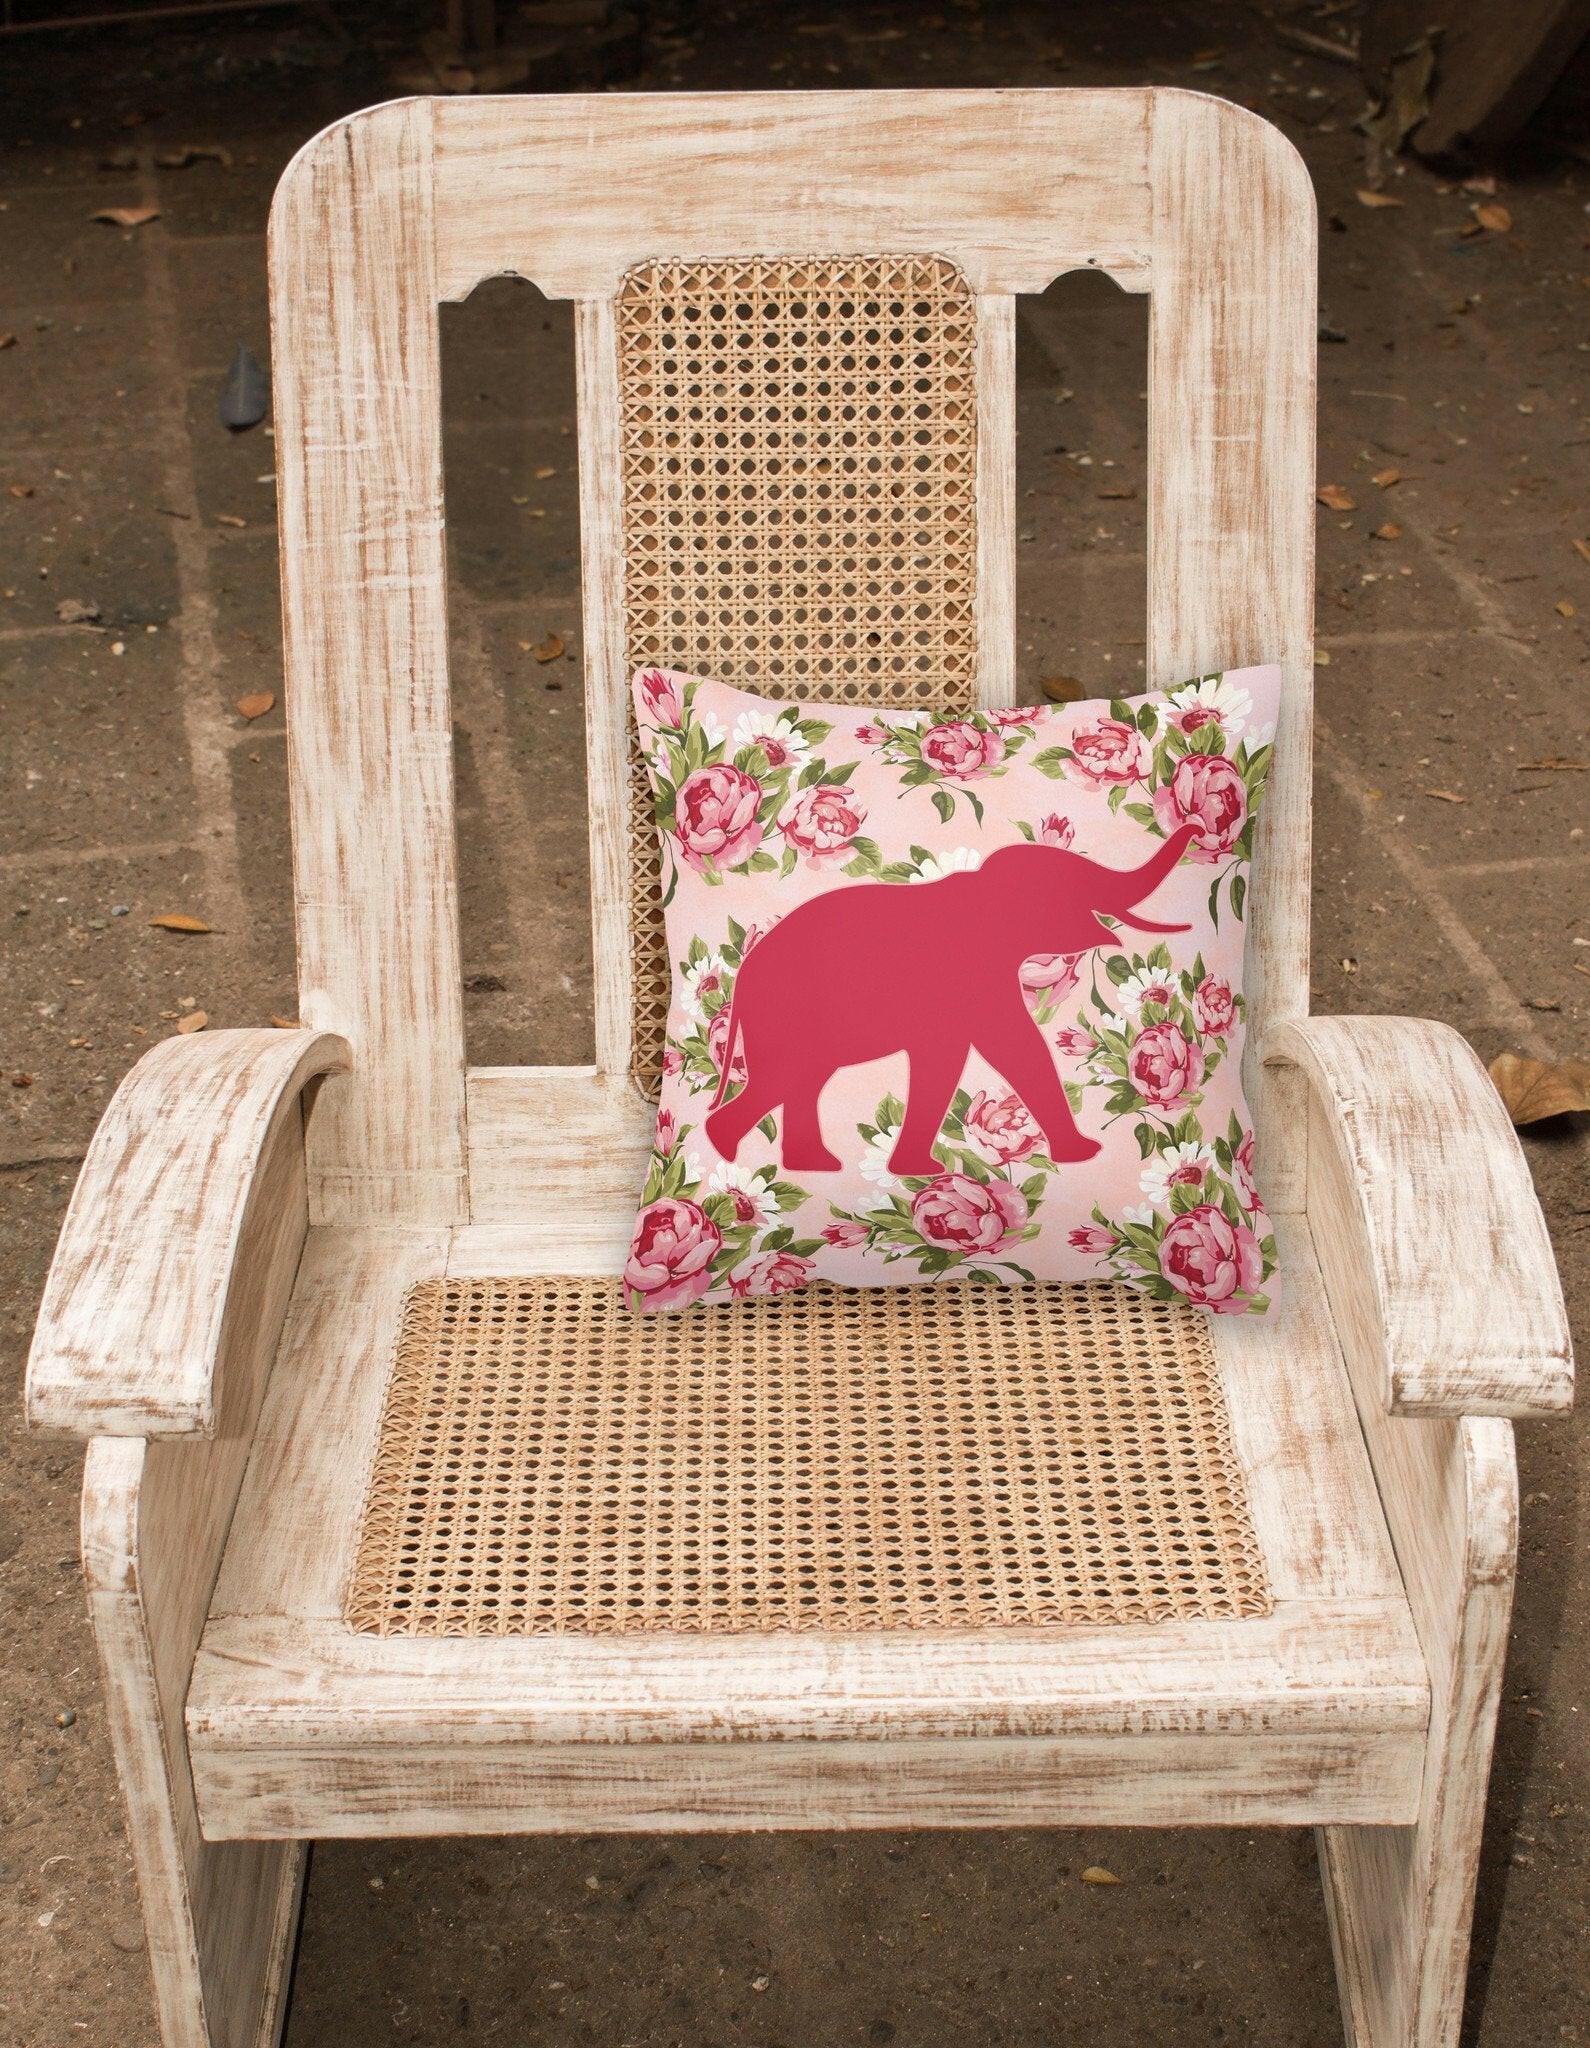 Elephant Shabby Chic Pink Roses  Fabric Decorative Pillow BB1011-RS-PK-PW1414 - the-store.com